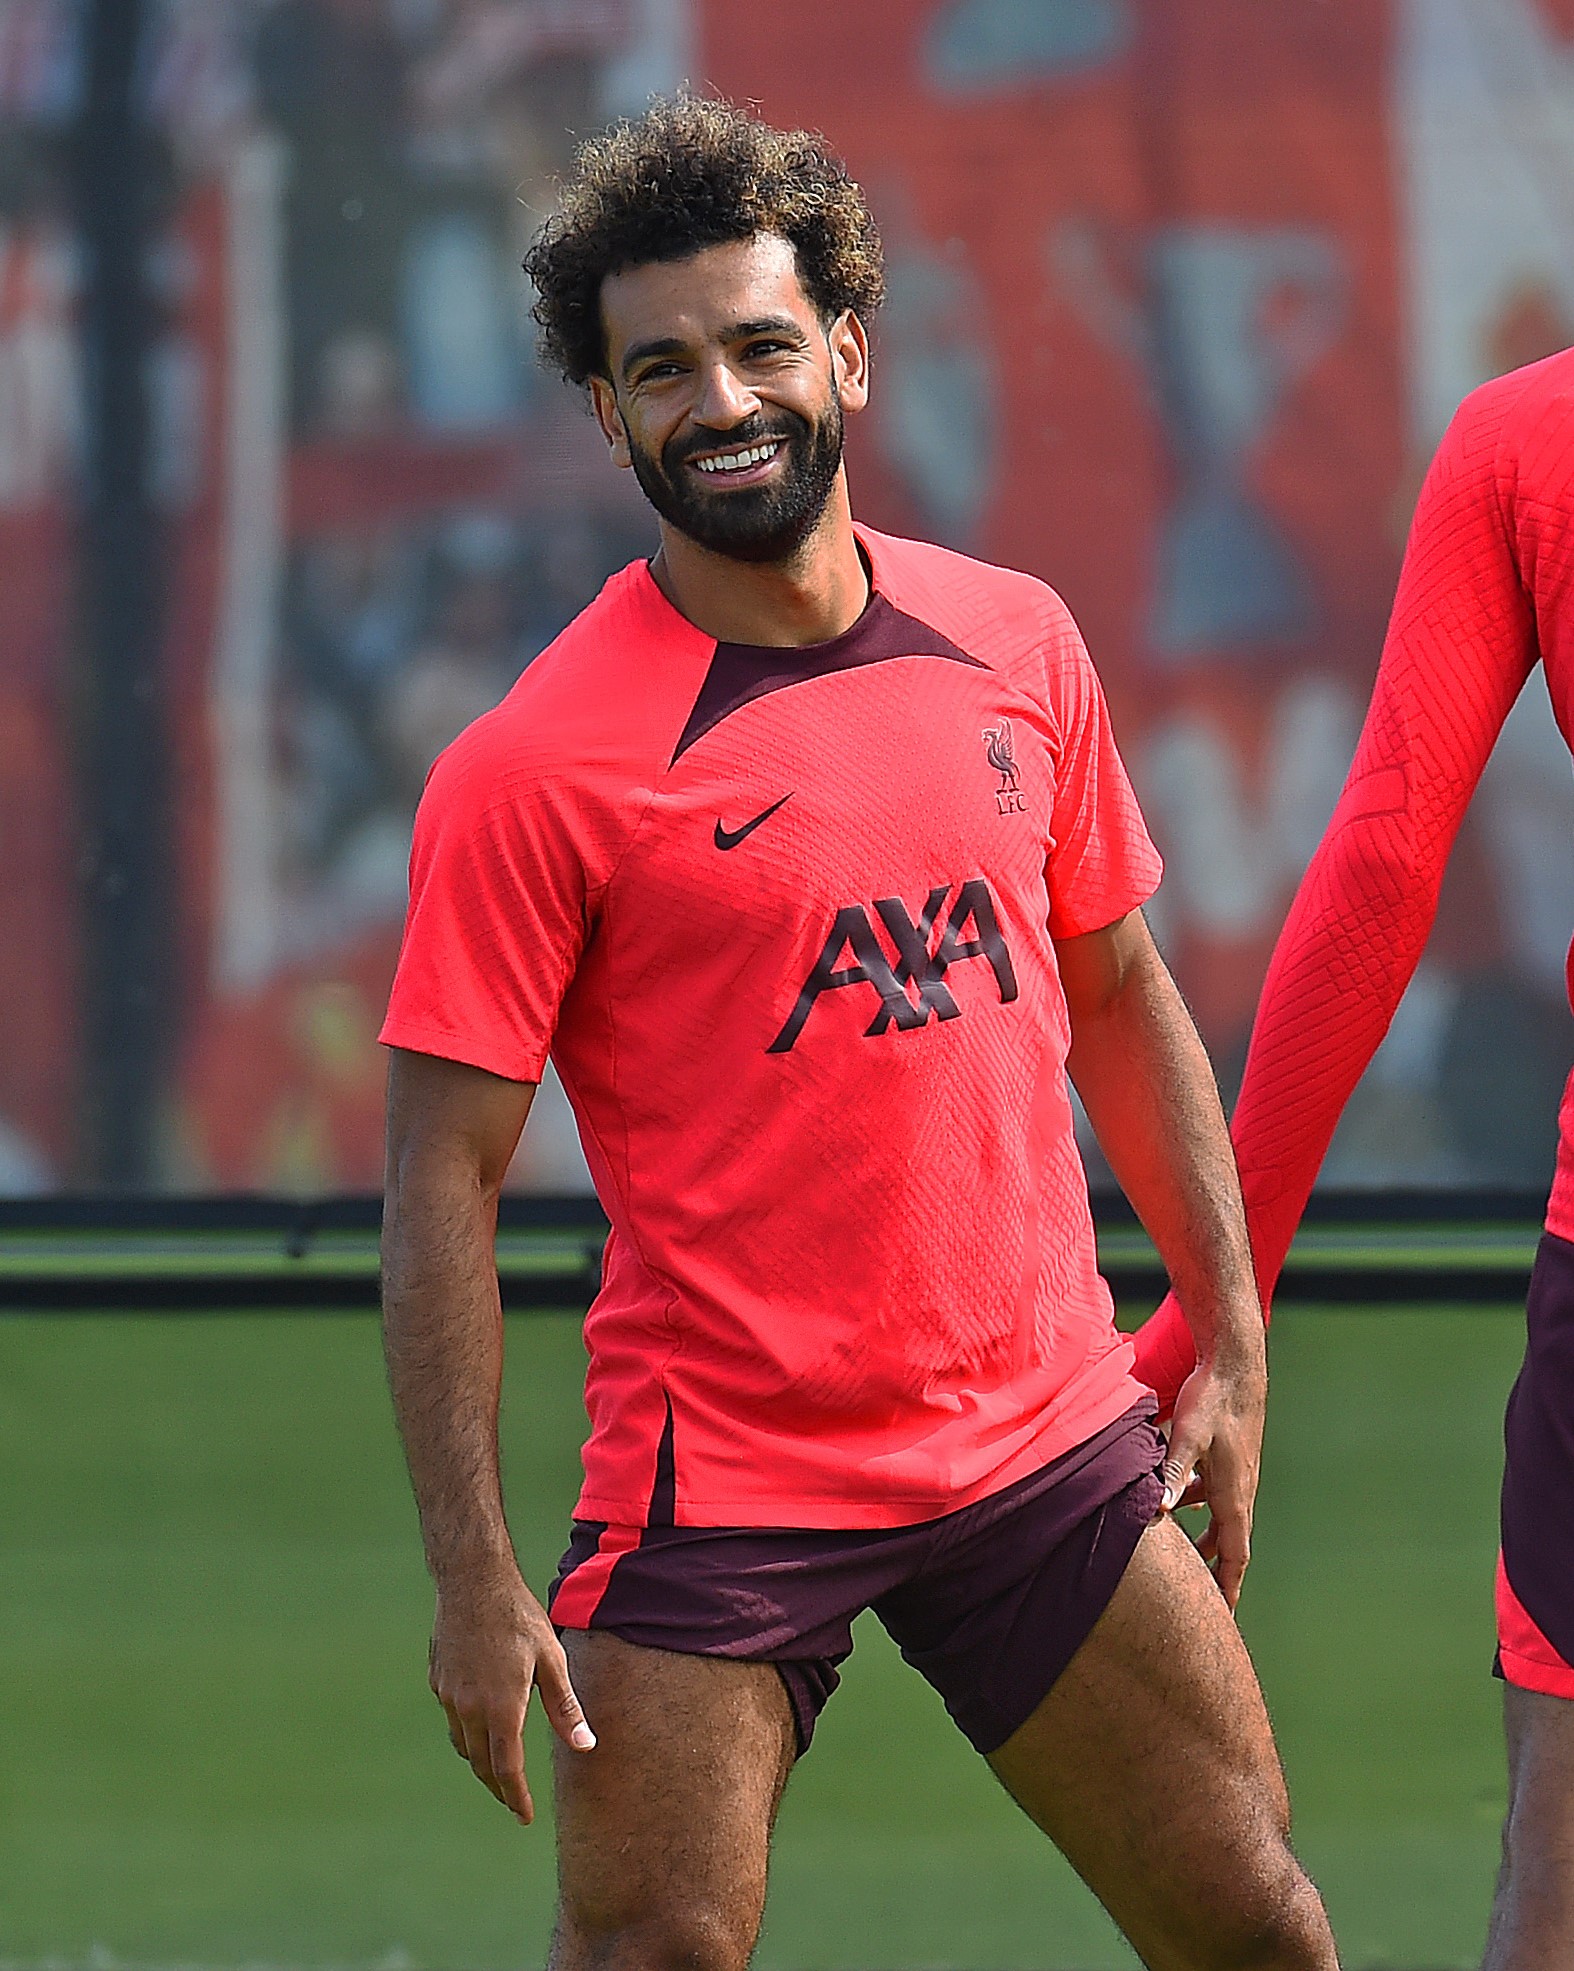 Mo Salah smiling during today's training session ahead of our Premier League fixture against Manchester United.